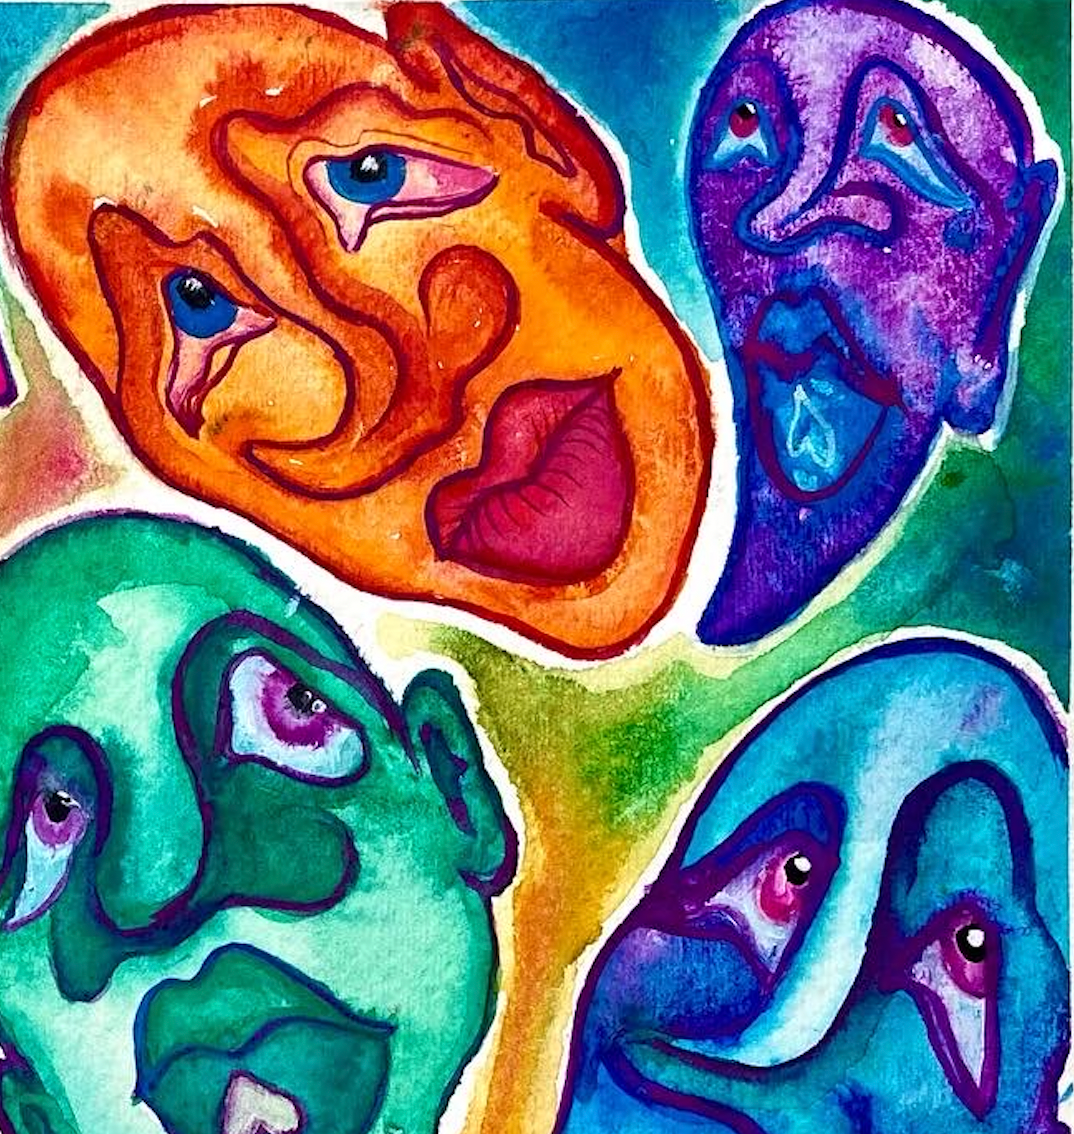 "Floating faces" painting on paper